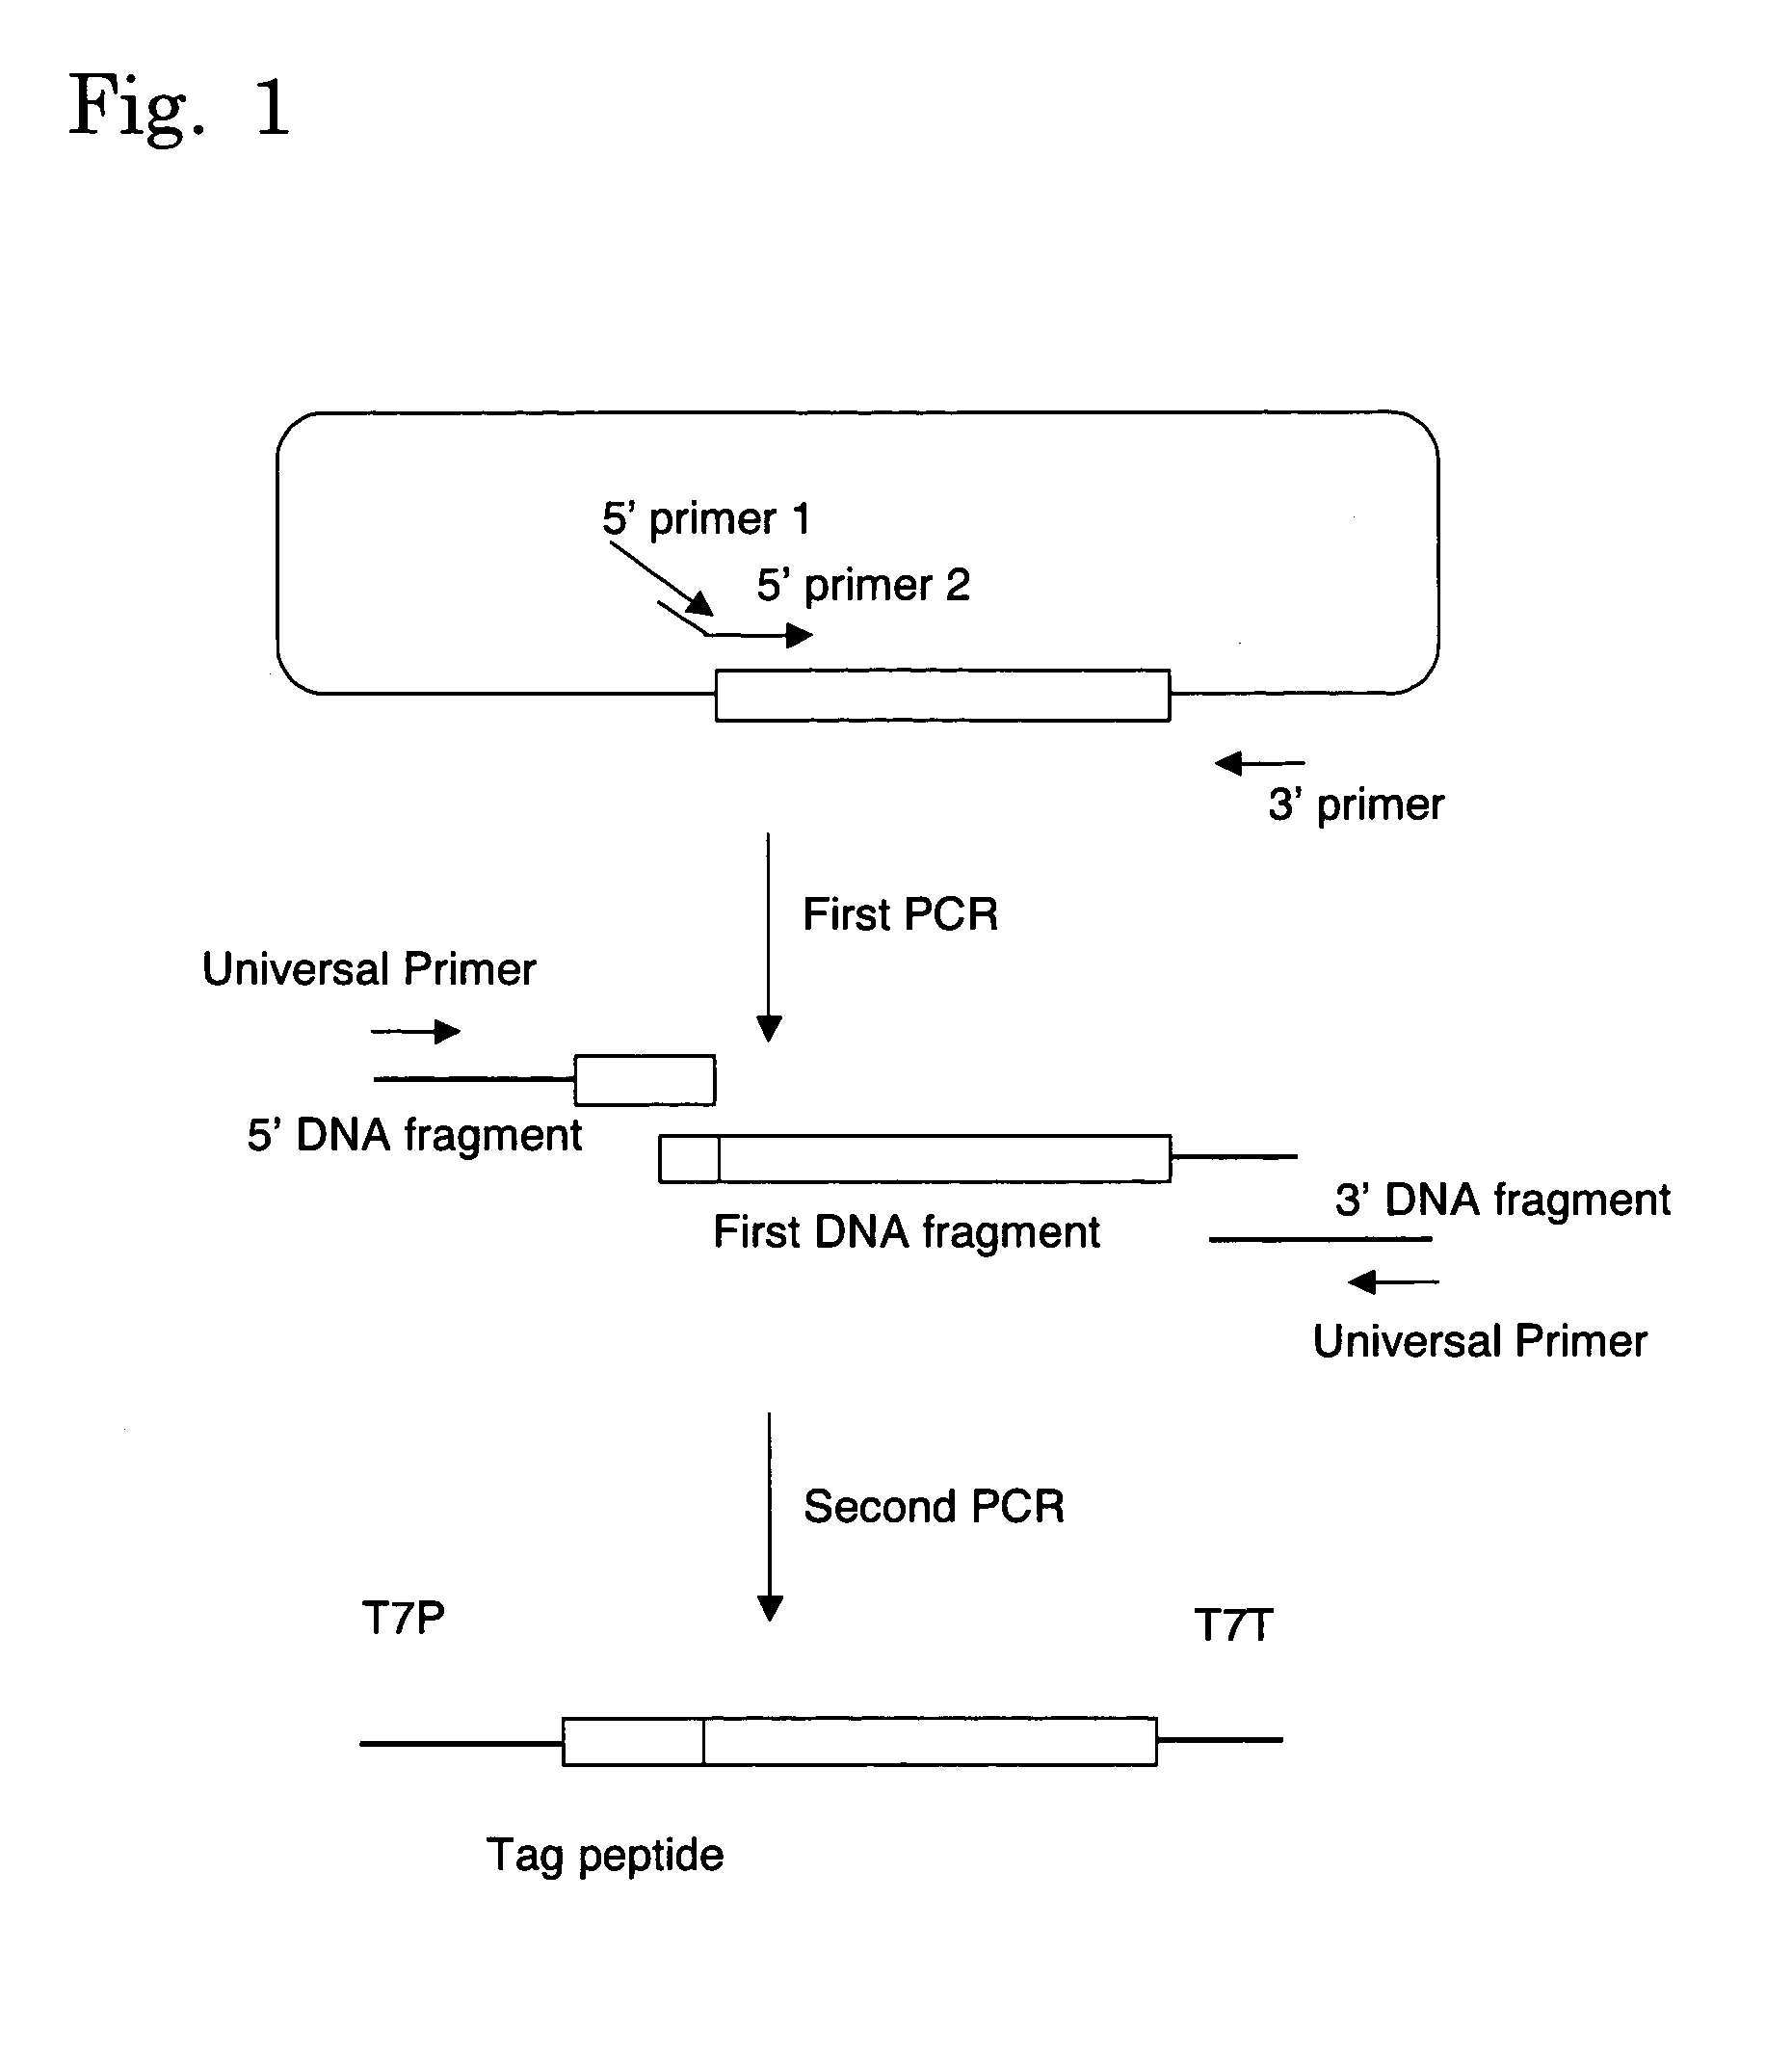 Method of producing template DNA and method of producing protein in cell-free protein synthesis system using the same